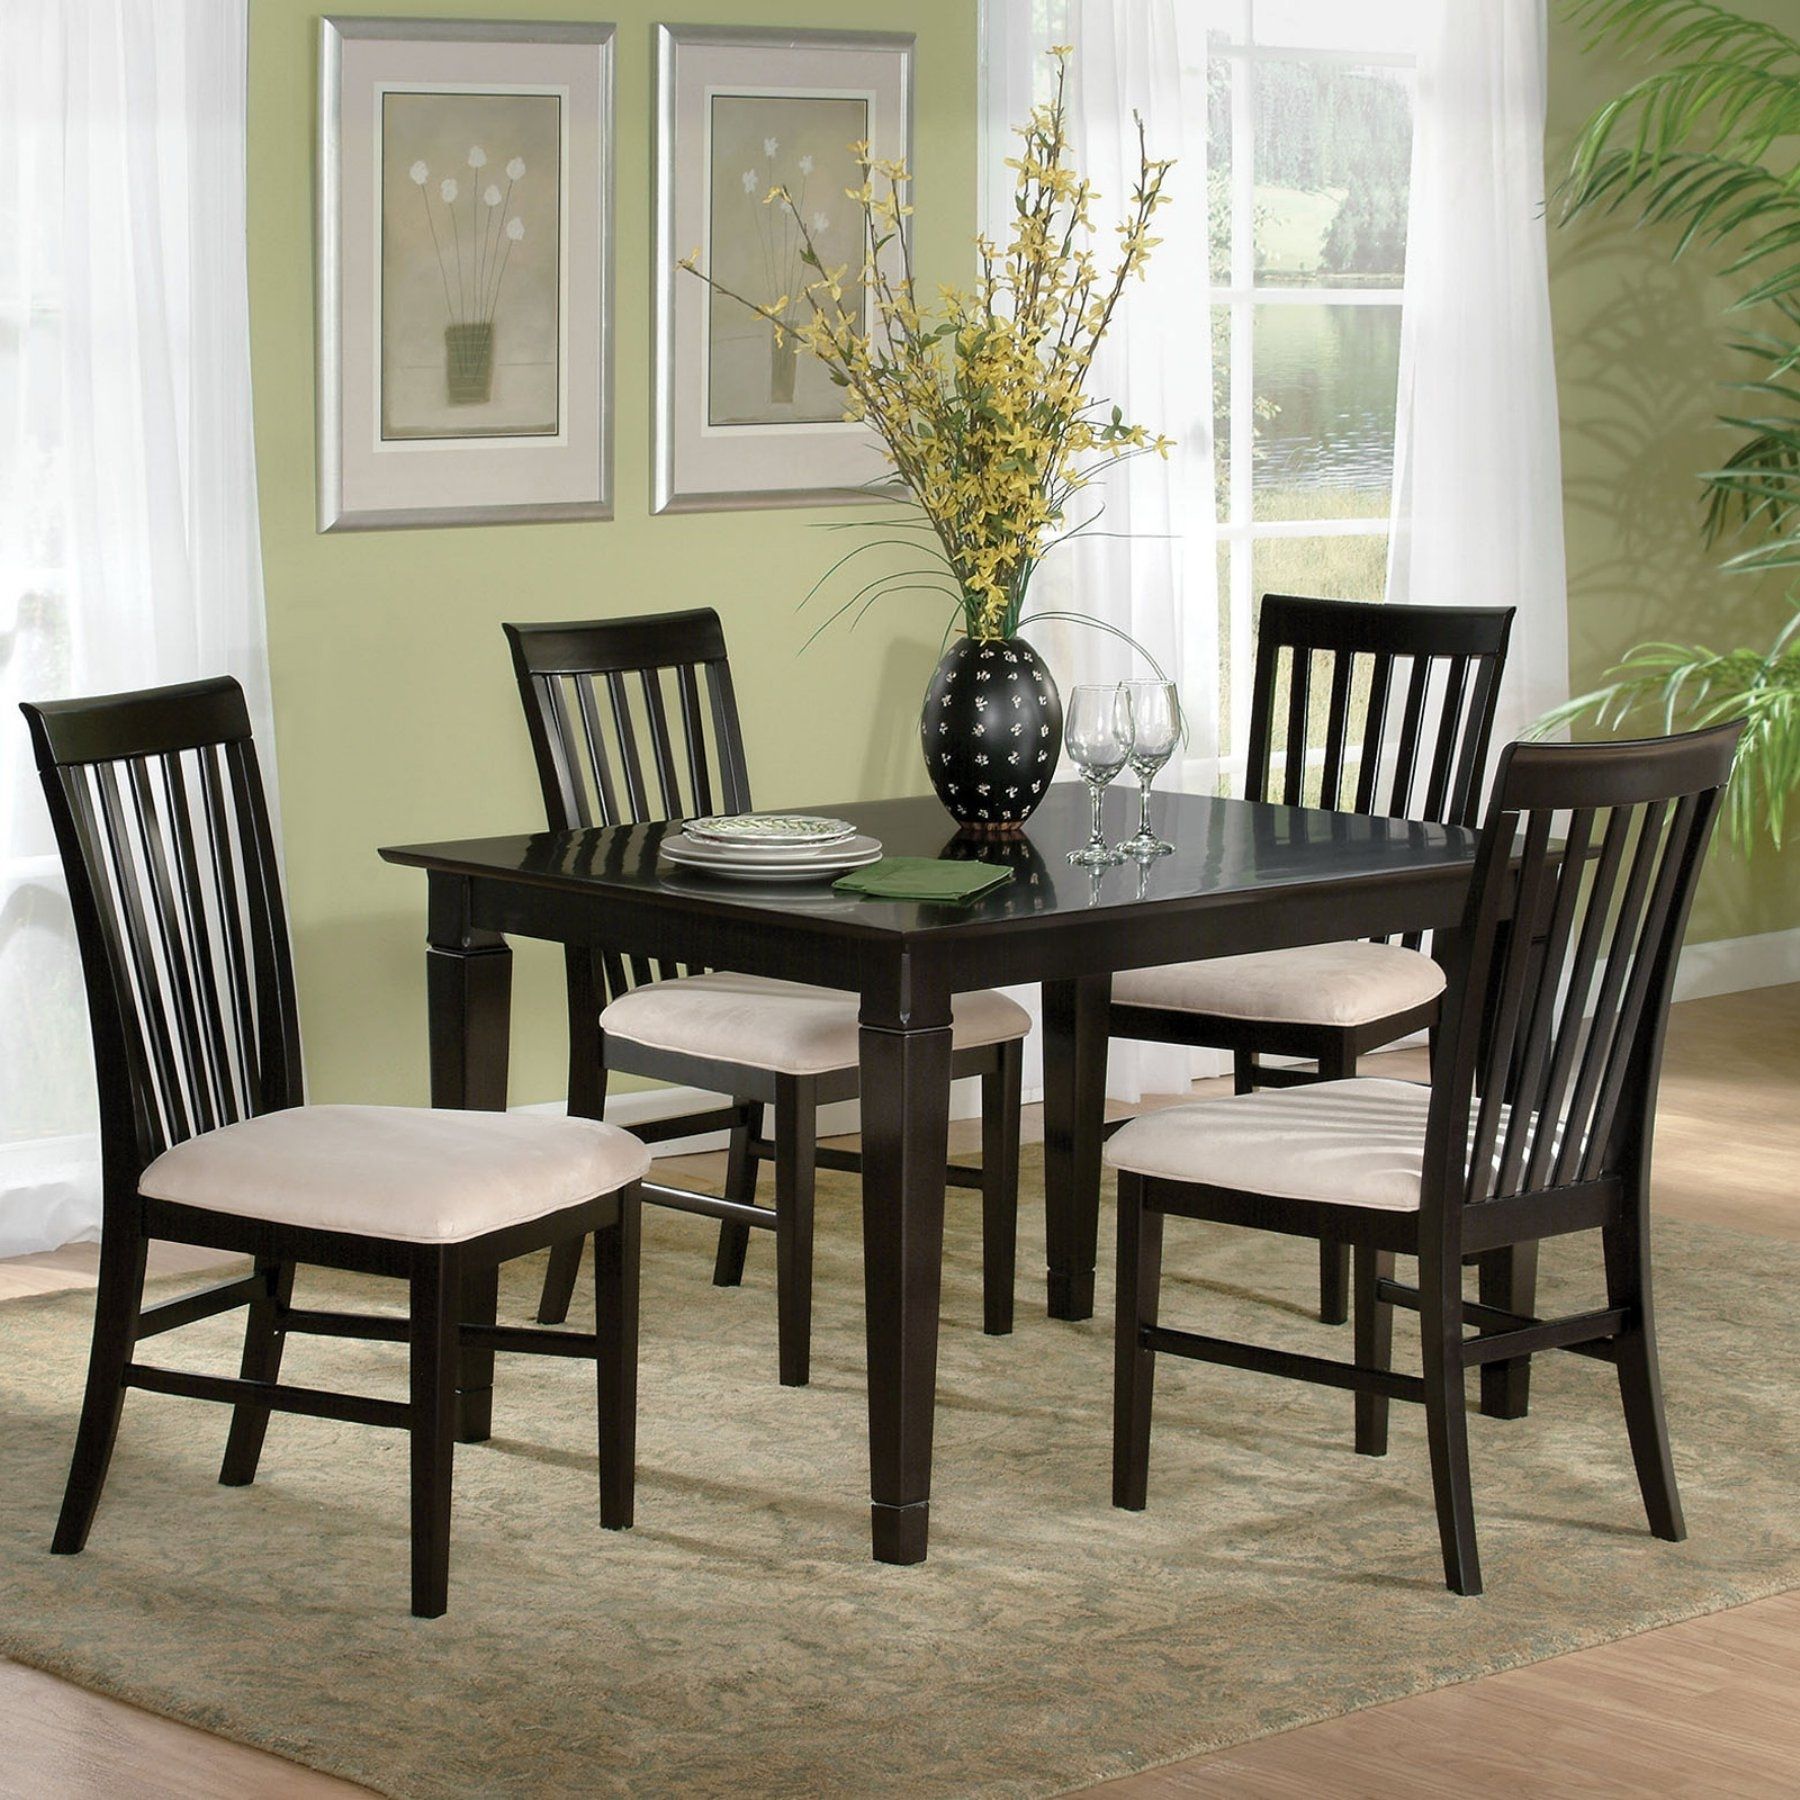 Atlantic Furniture Montego Bay 5 Piece Espresso Dining Table Set Within Newest Craftsman 5 Piece Round Dining Sets With Uph Side Chairs (View 19 of 20)